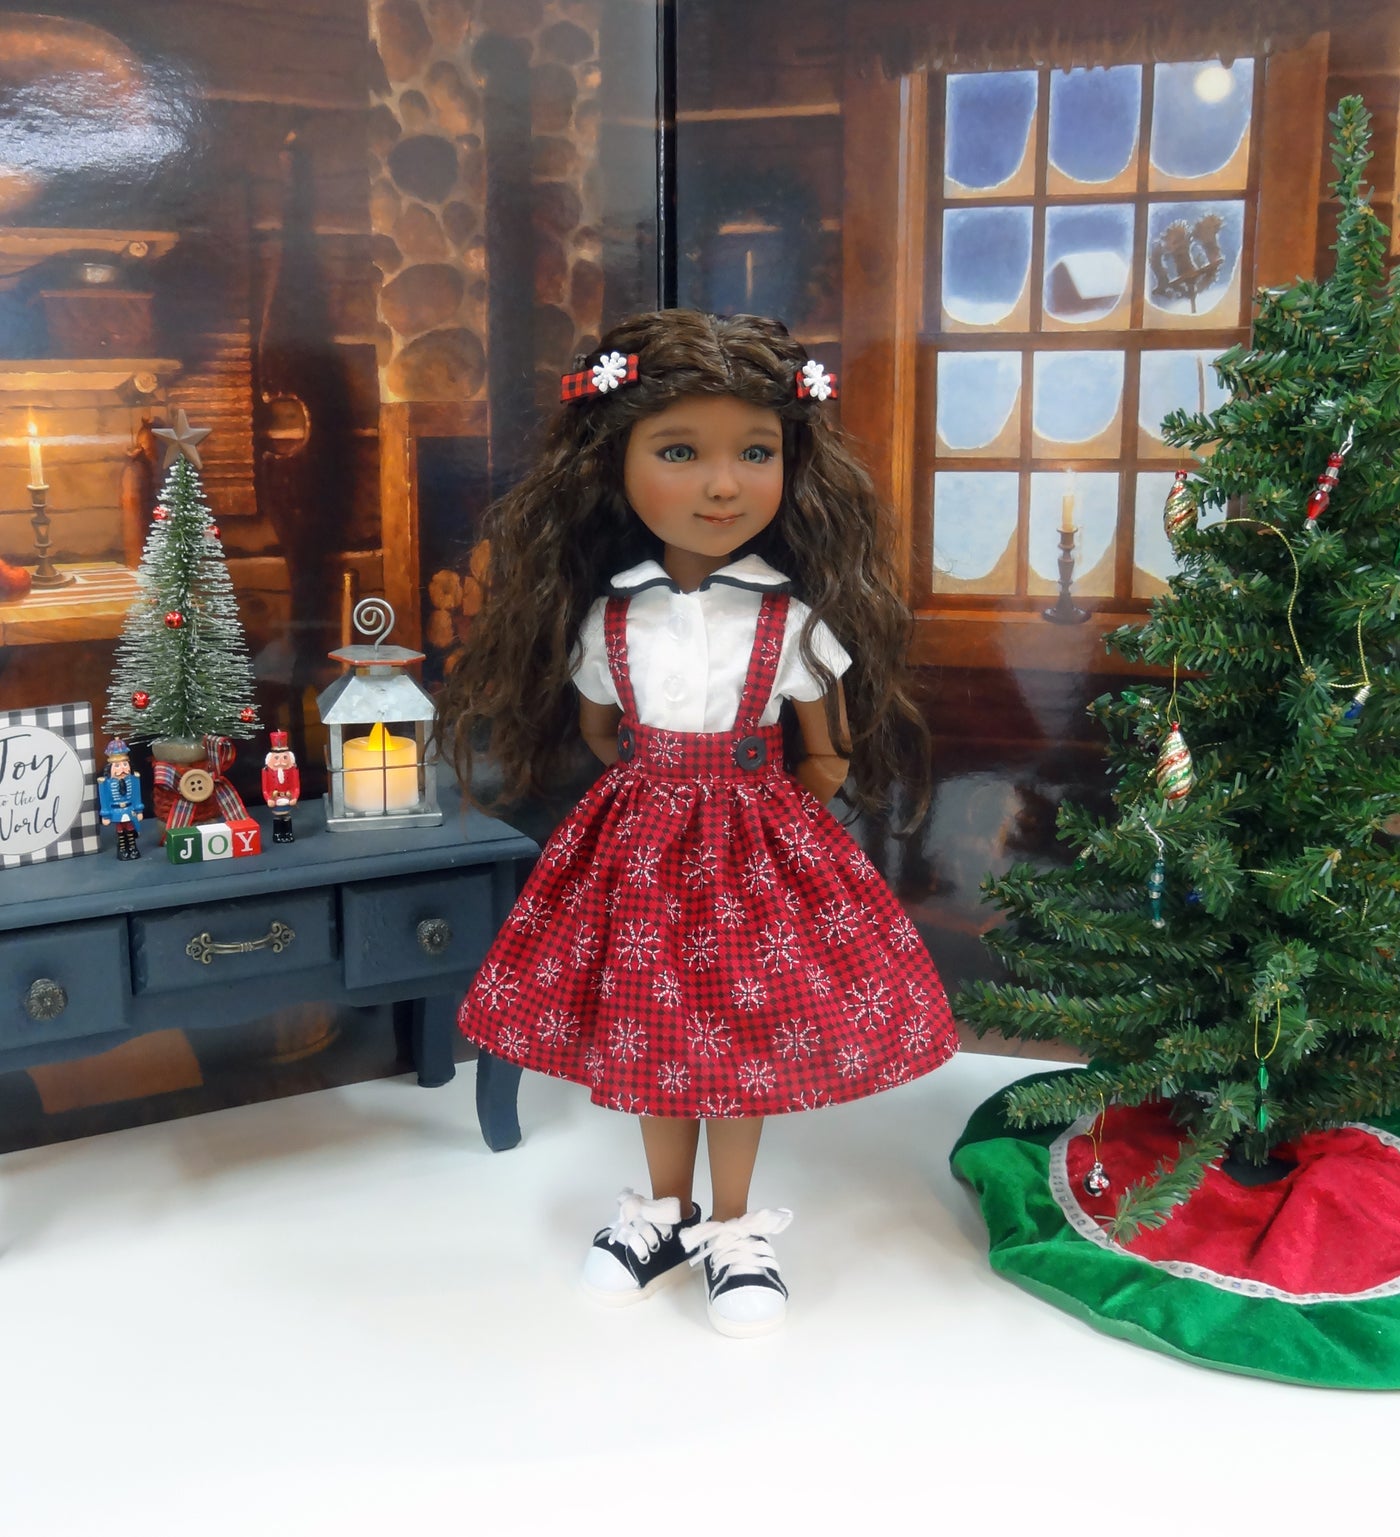 Snowflake Check - blouse & jumper for Ruby Red Fashion Friends doll